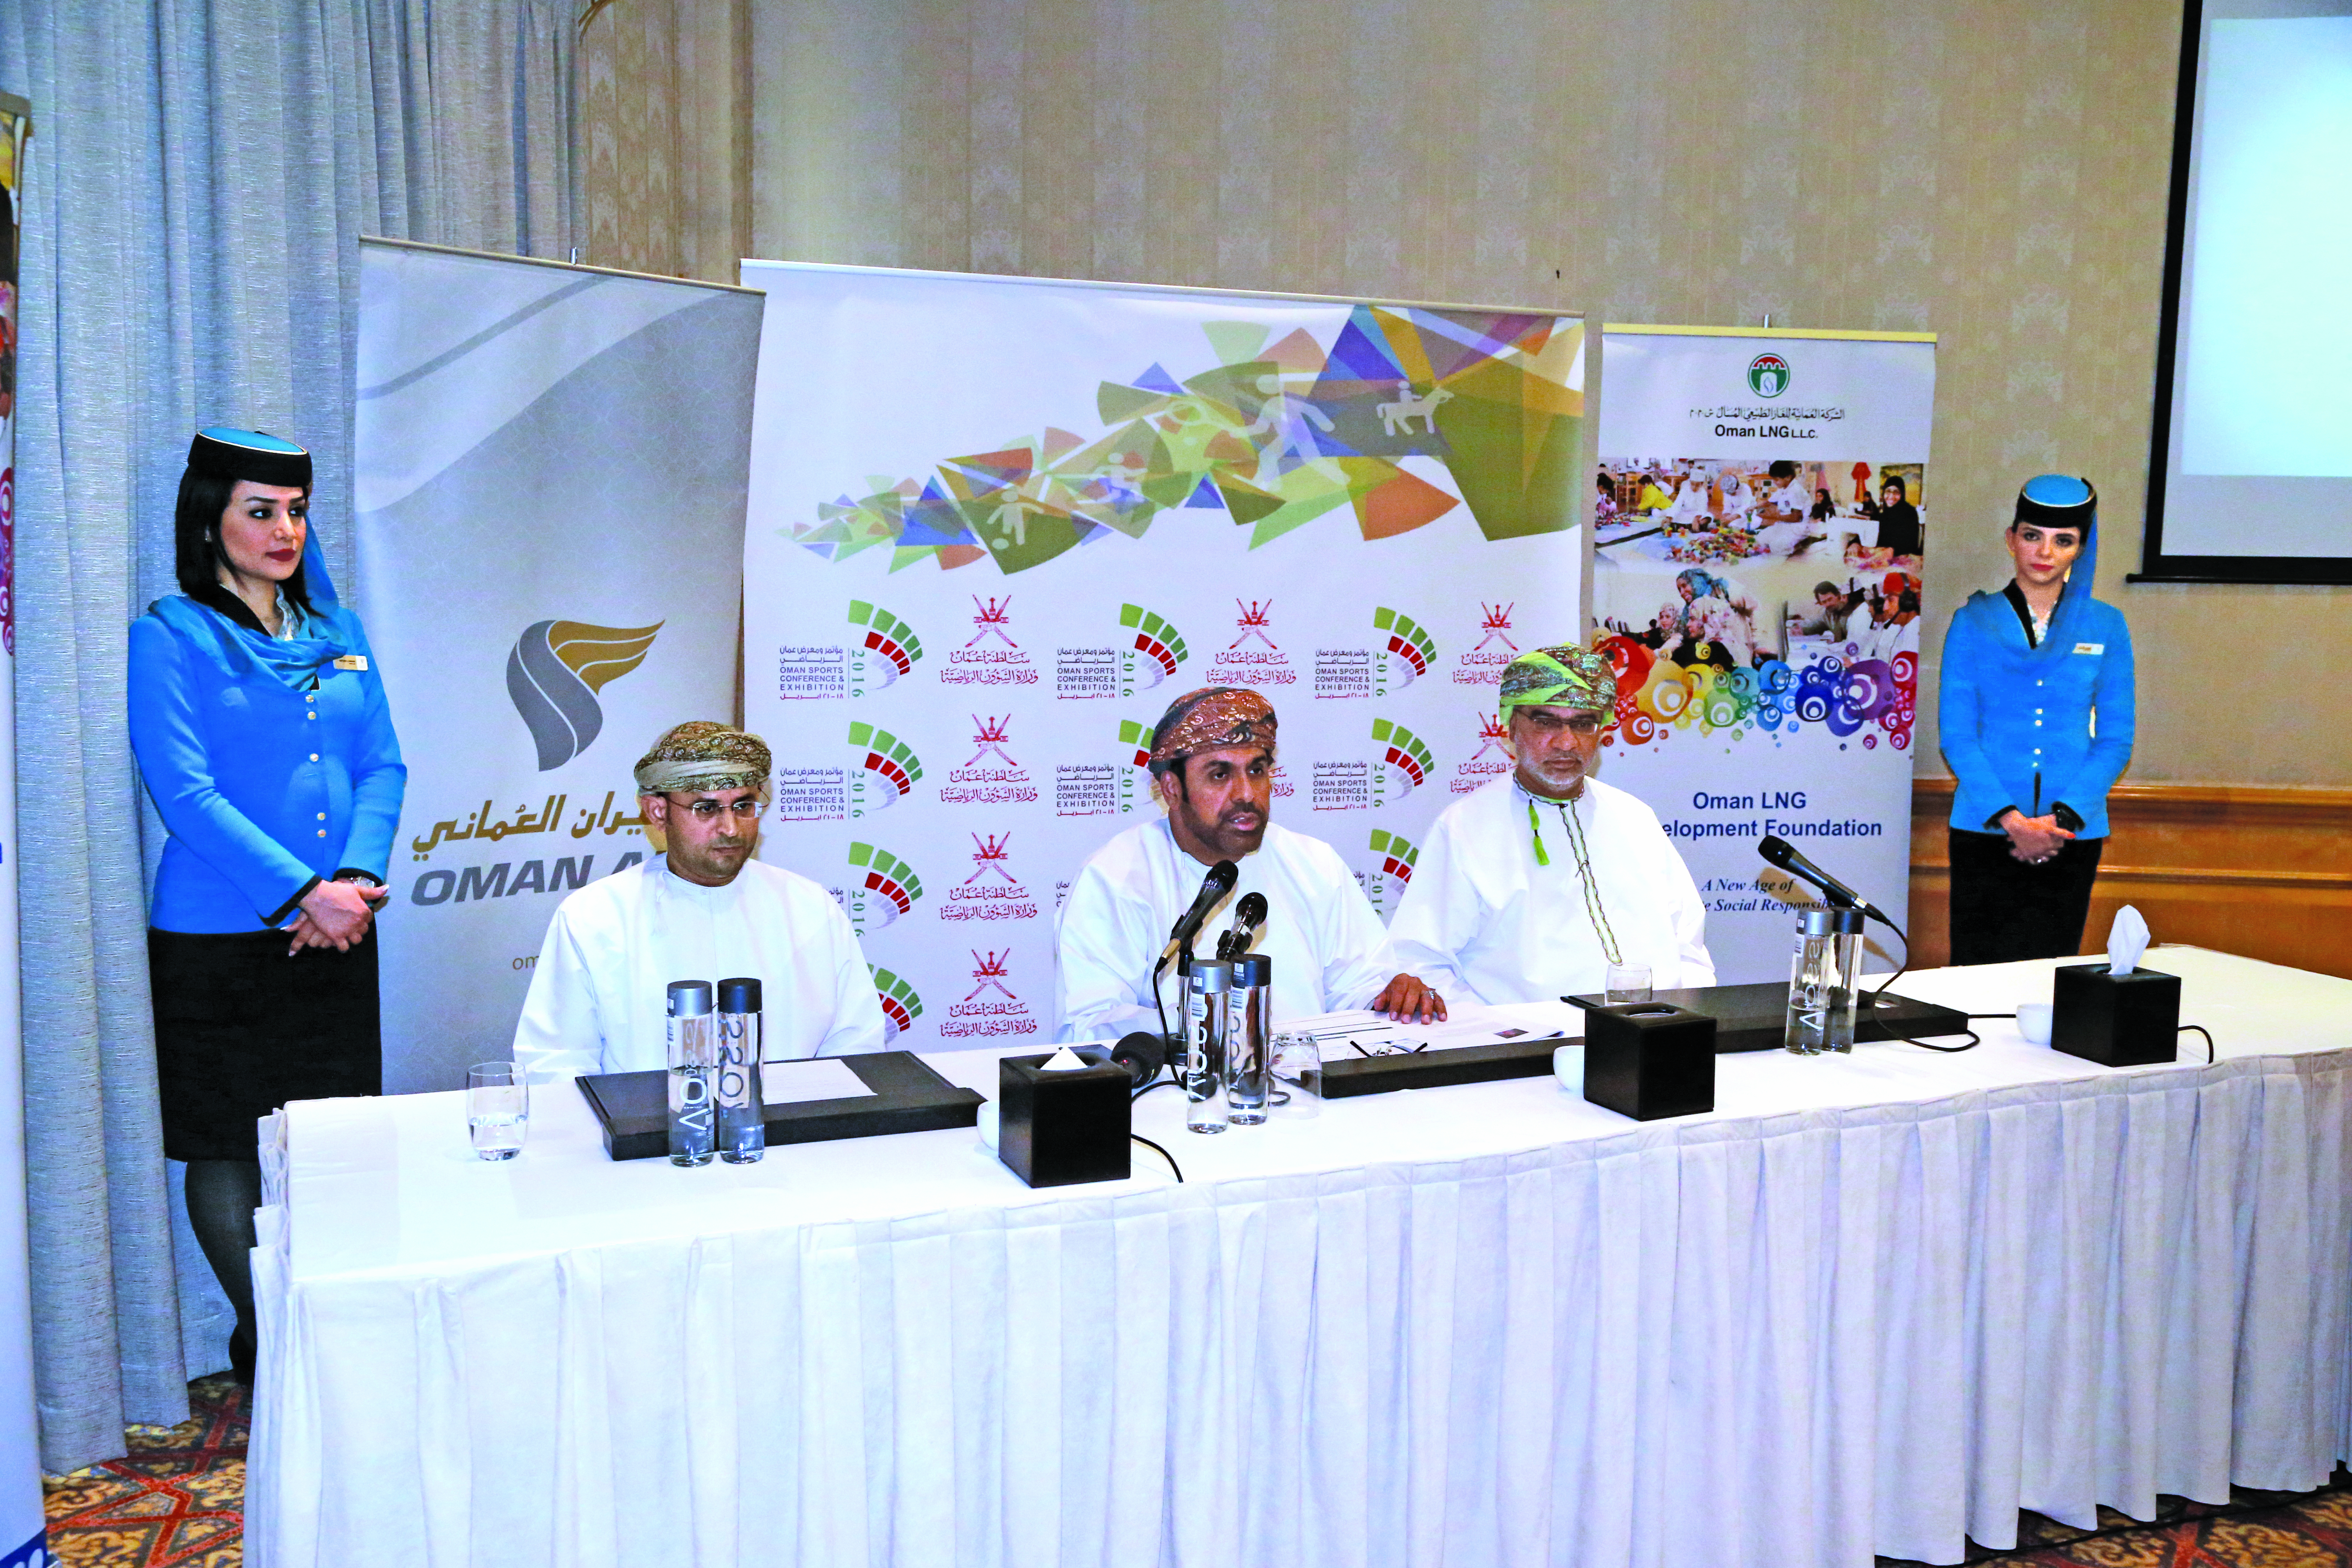 Omani stars will be under focus at Oman Sports Conference and Exhibition